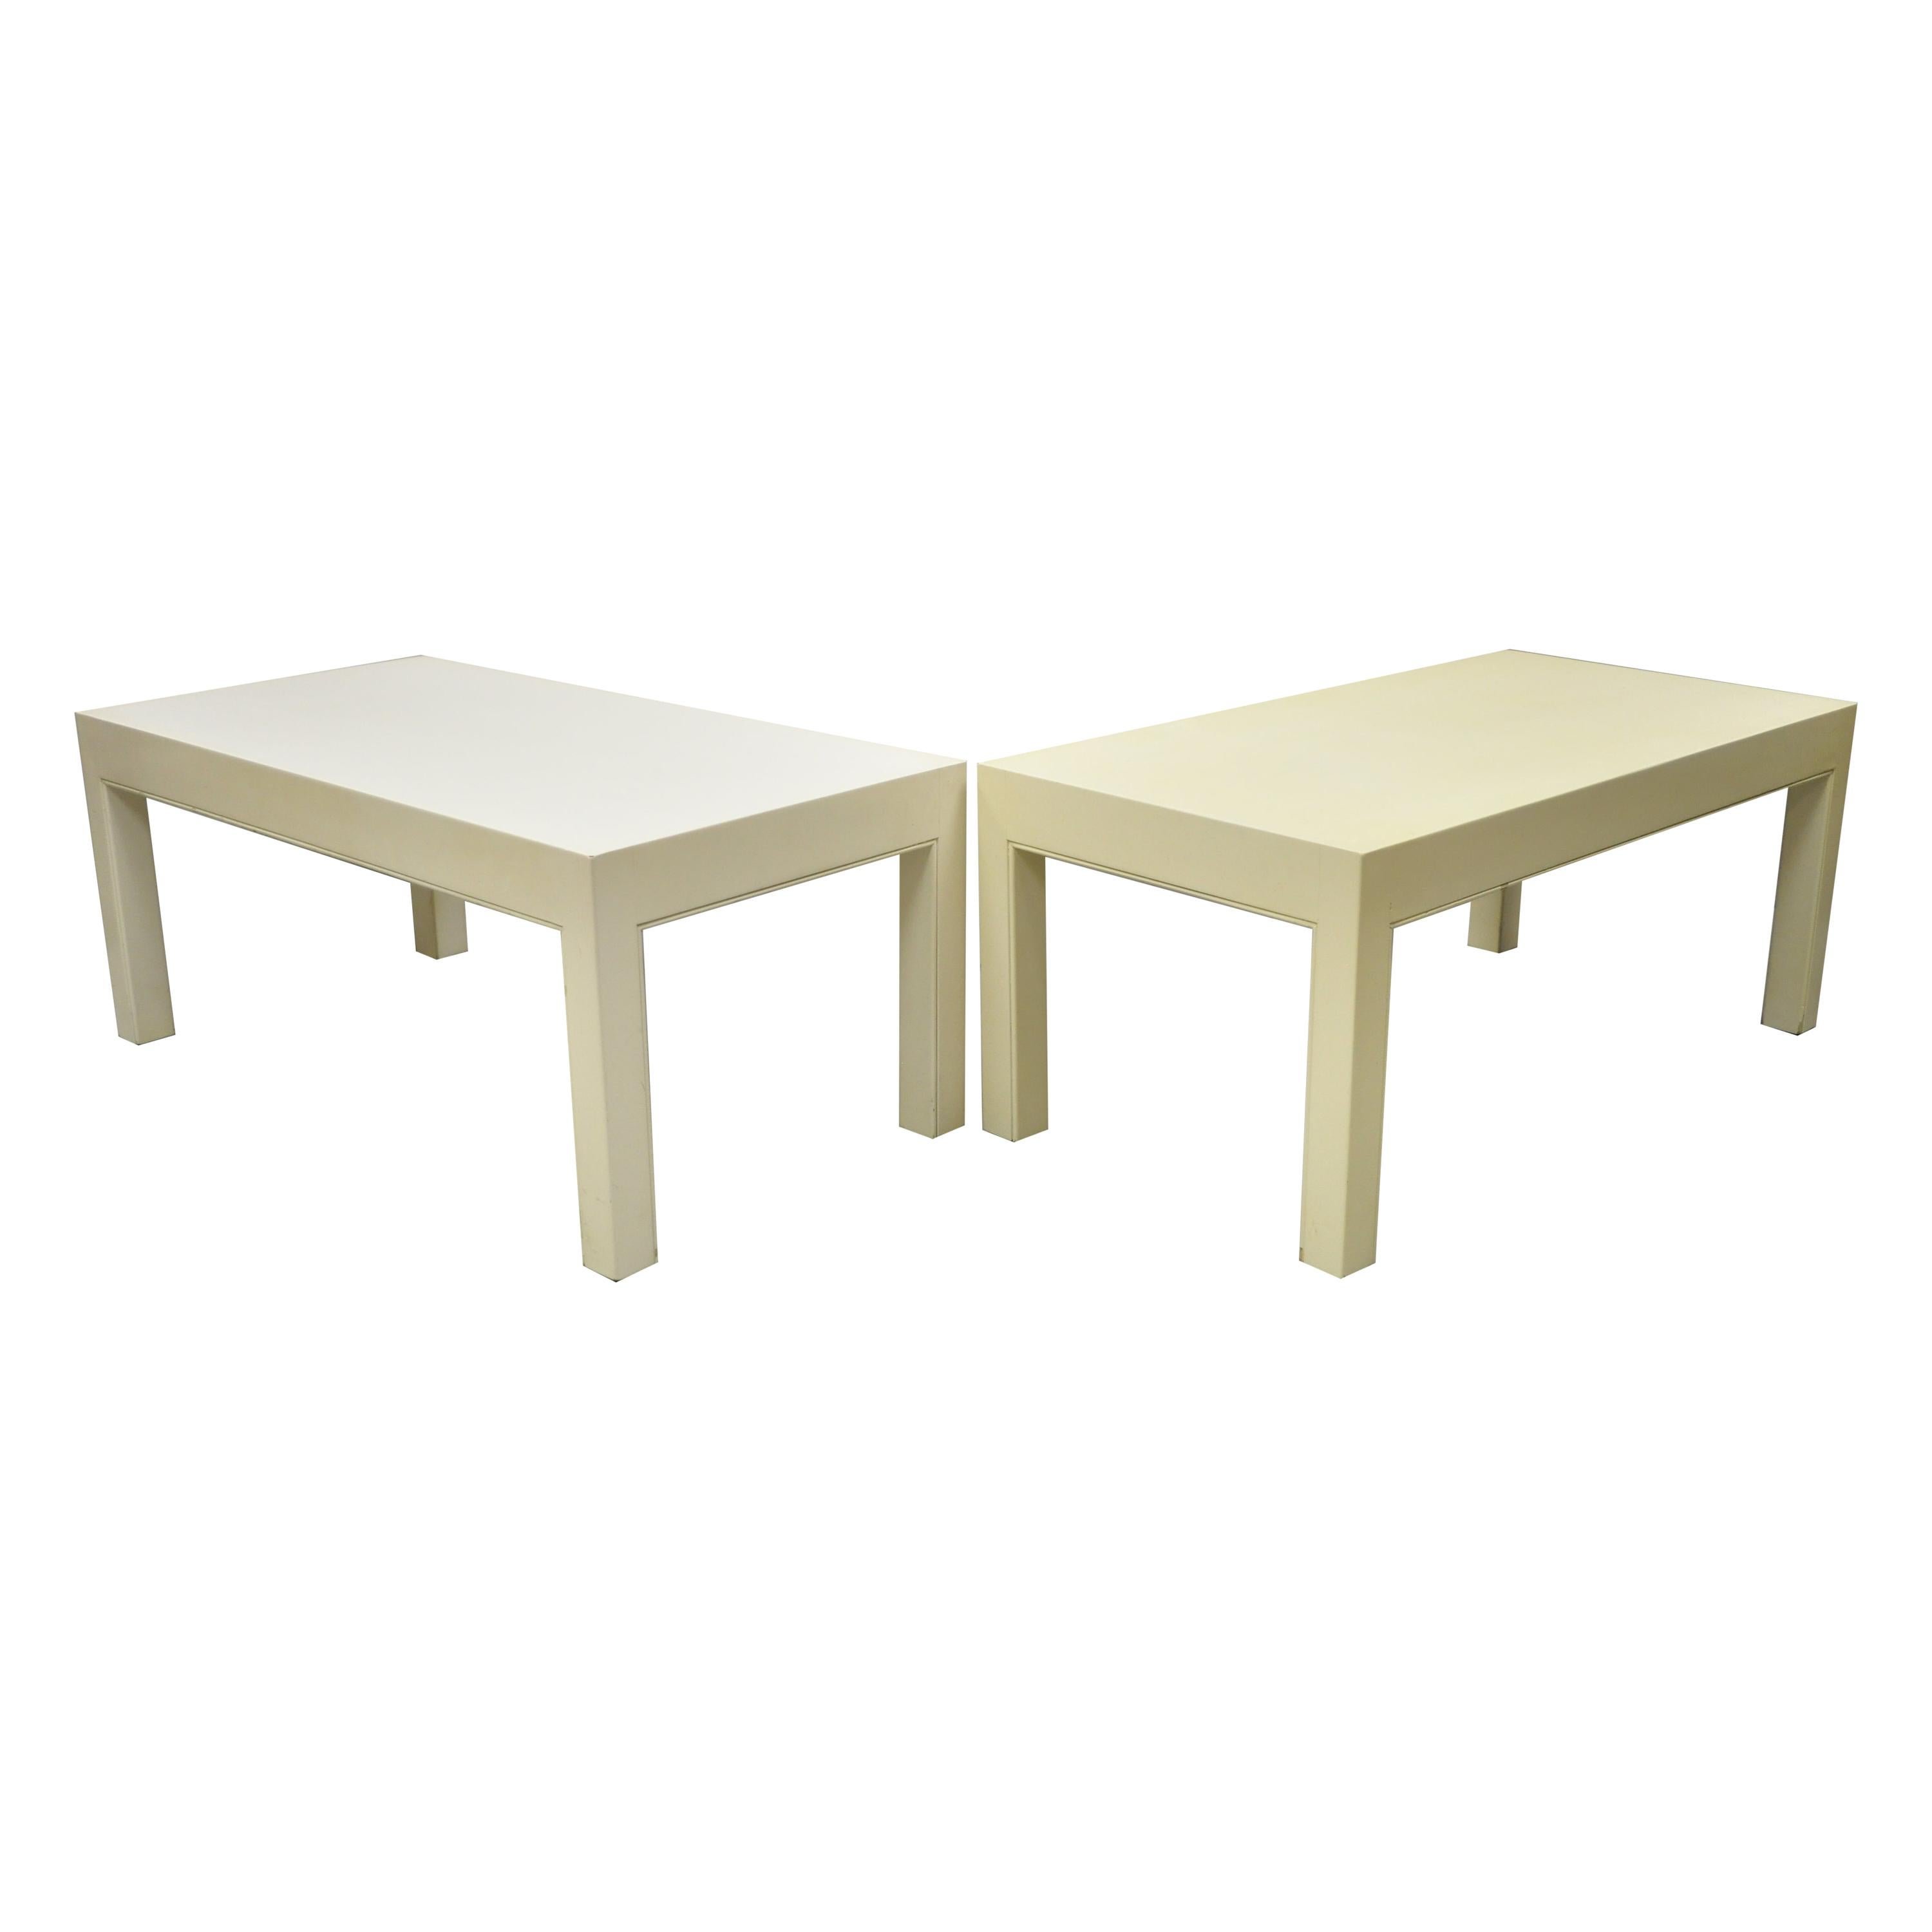 Vintage Modern Solid Wood Cream Lacquered Parsons Low Pedestal Side Table - Pair For Sale